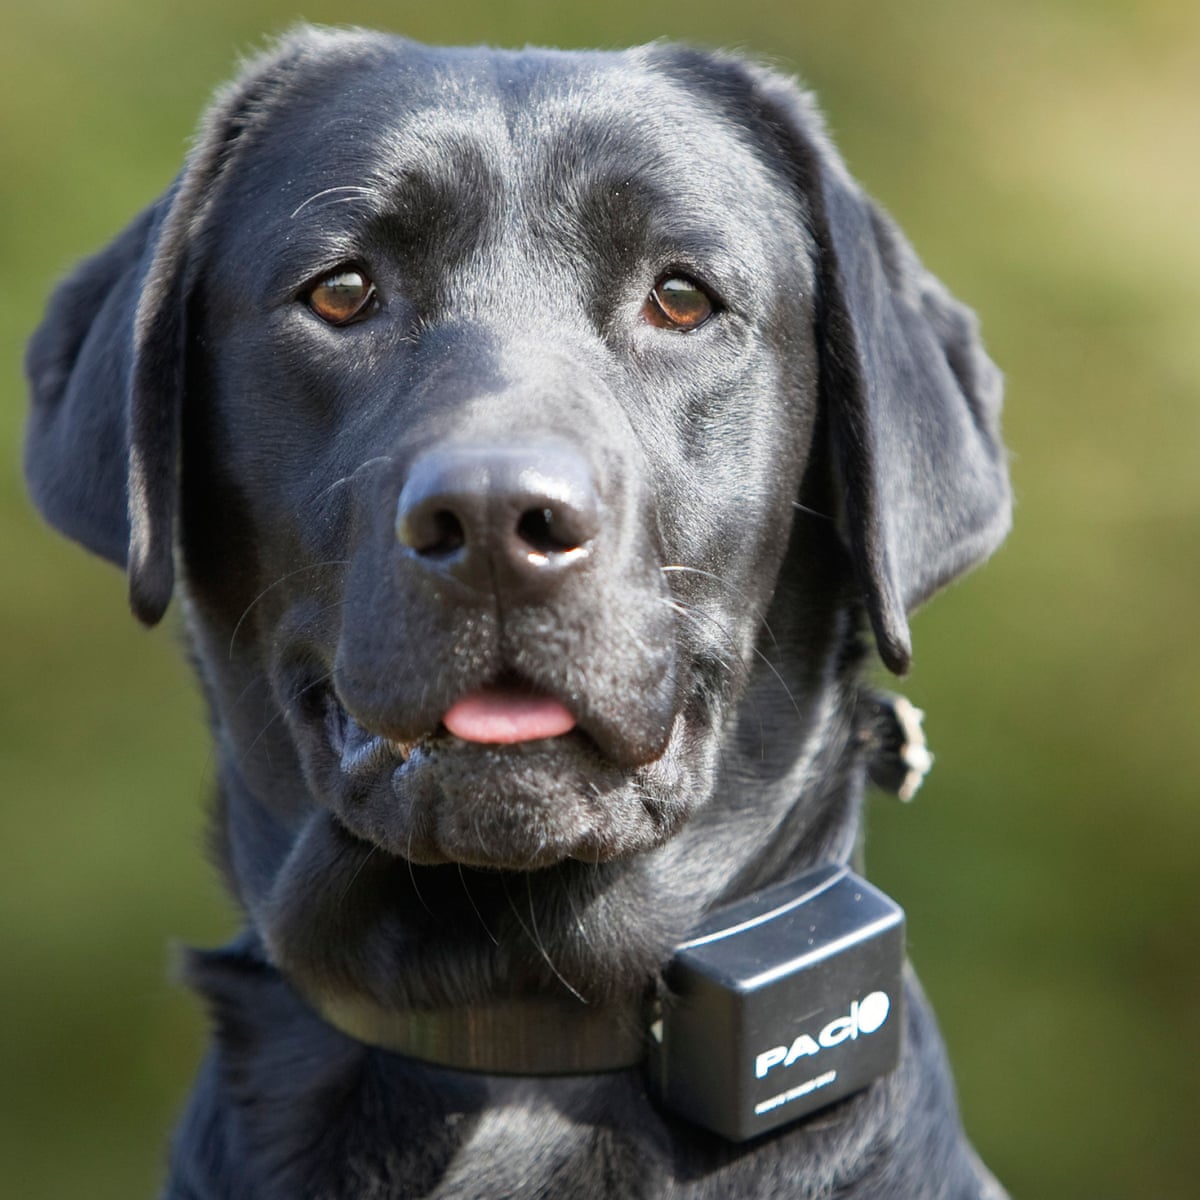 Shock tactics: can electric dog collars ever be ethical? | Dogs | The  Guardian